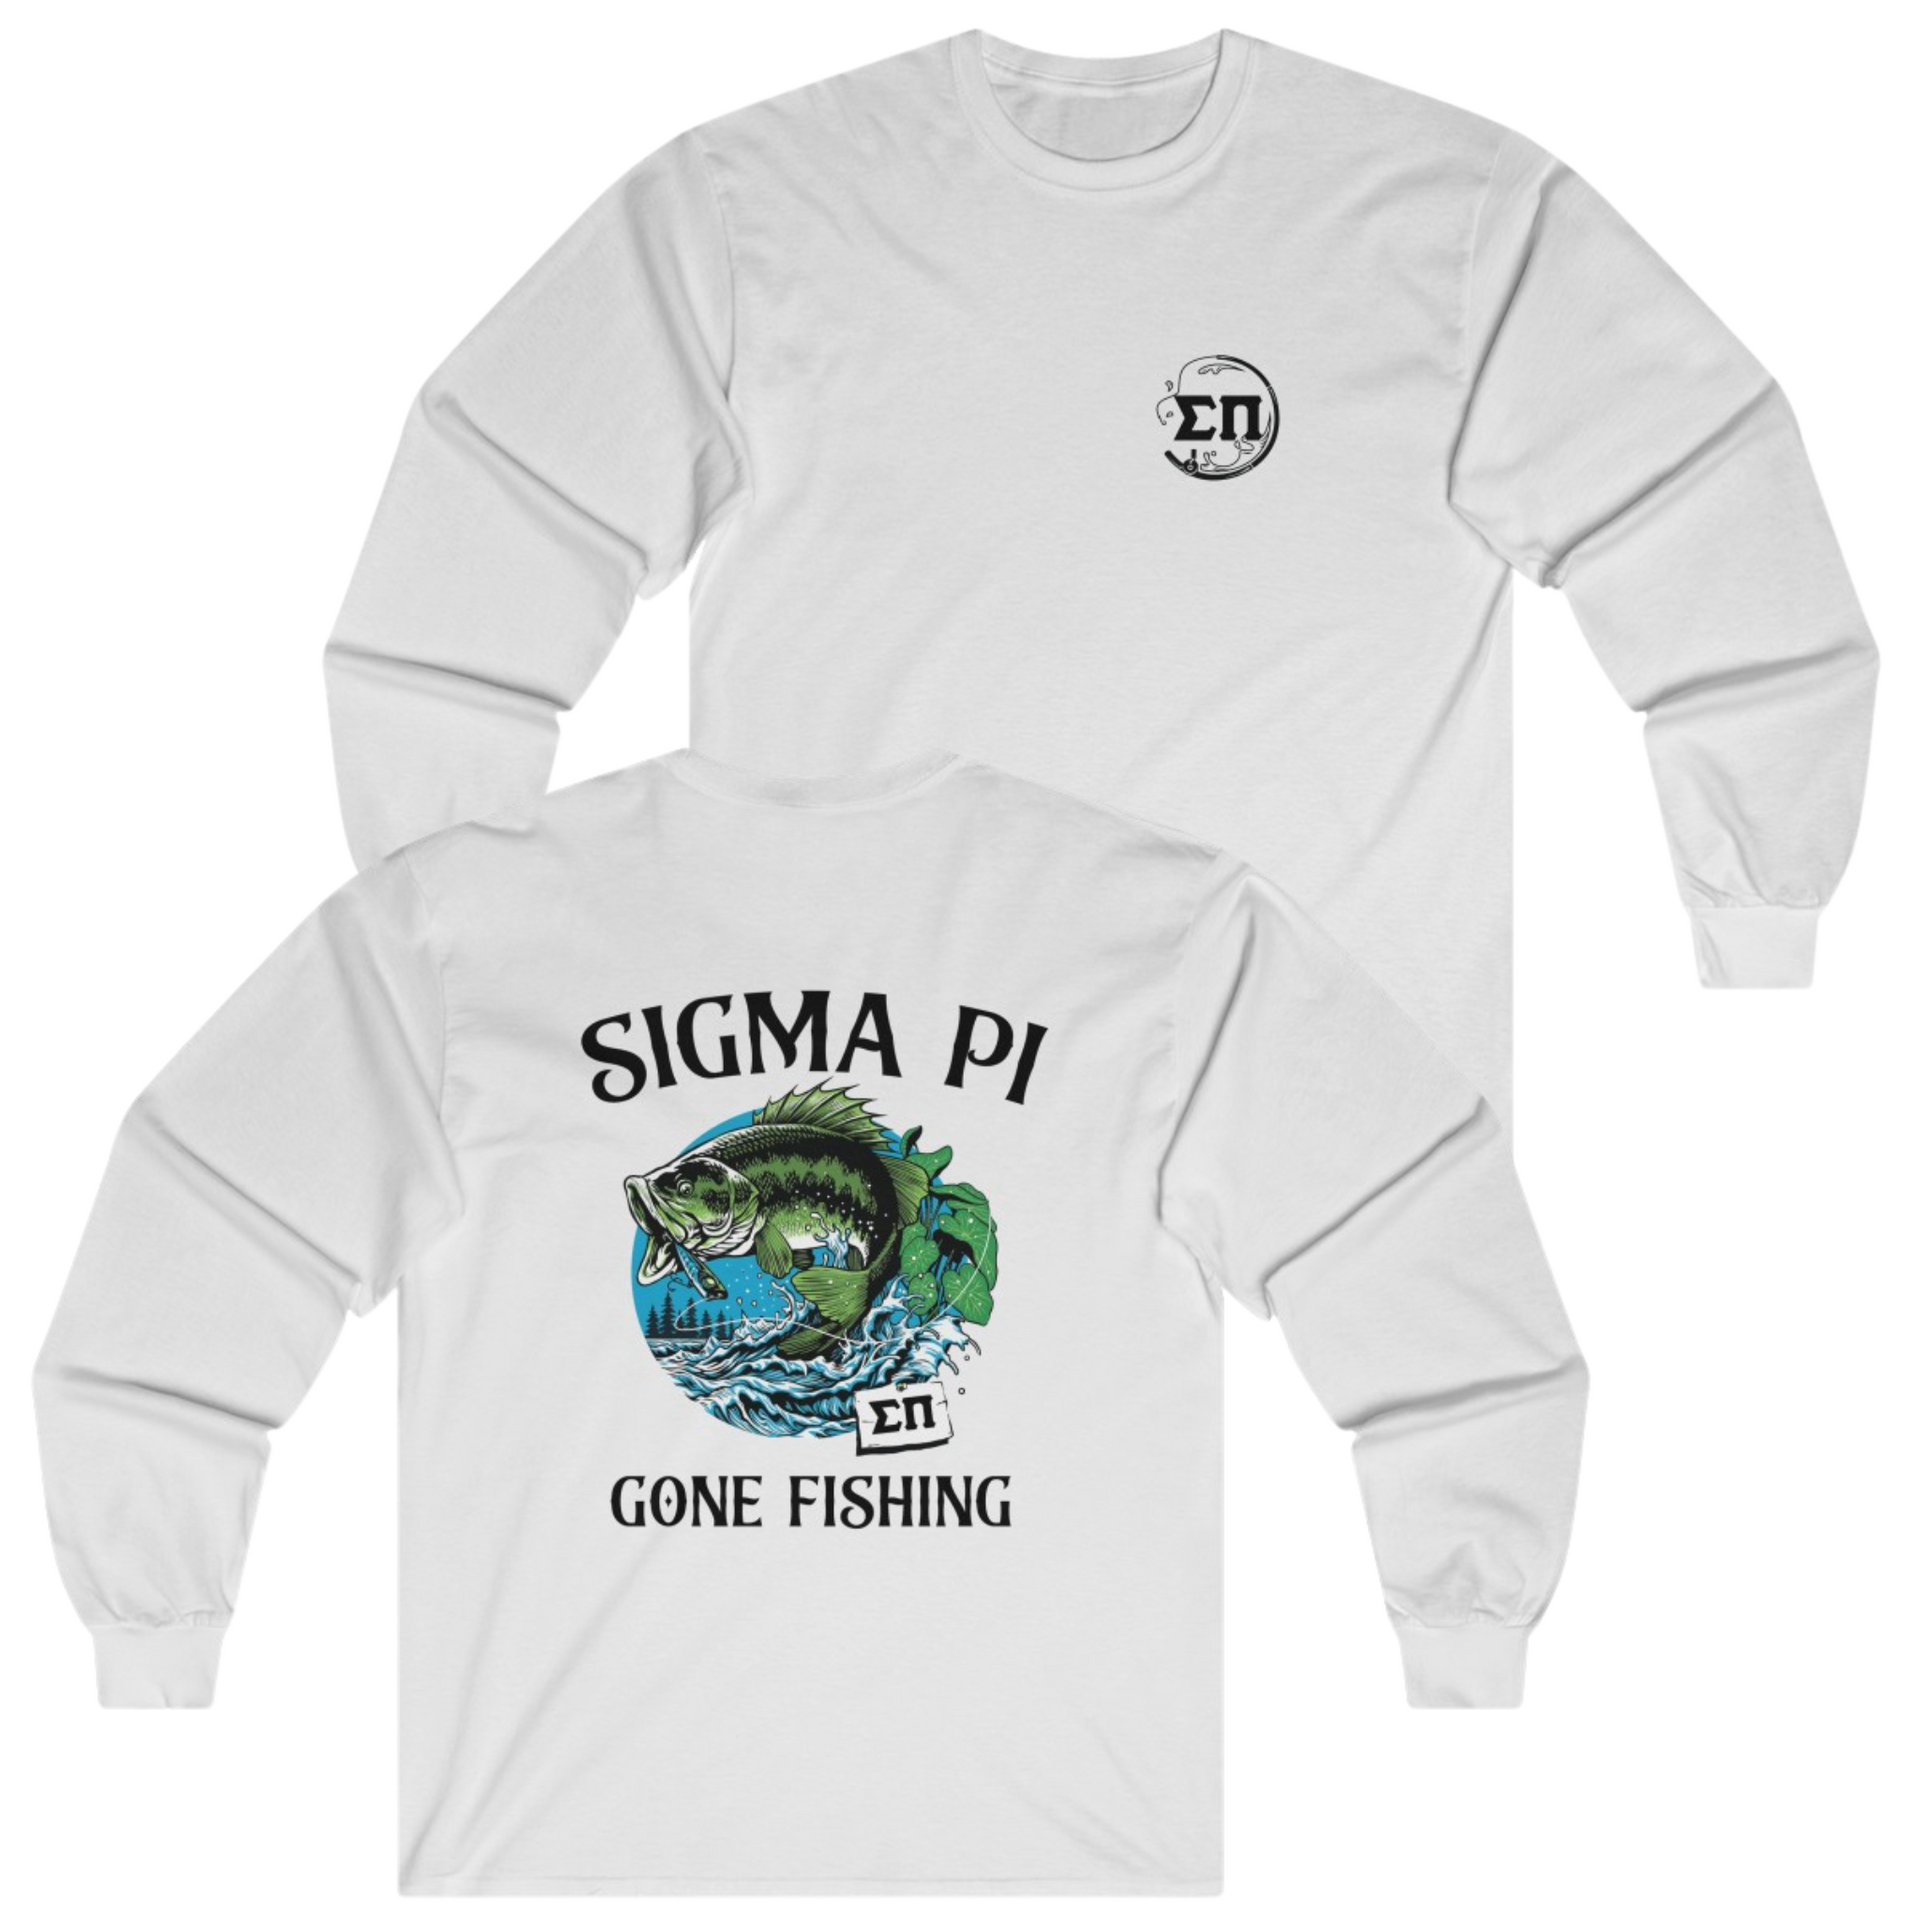 White Sigma Pi Graphic Long Sleeve T-Shirt | Gone Fishing | Sigma Pi Apparel and Merchandise 